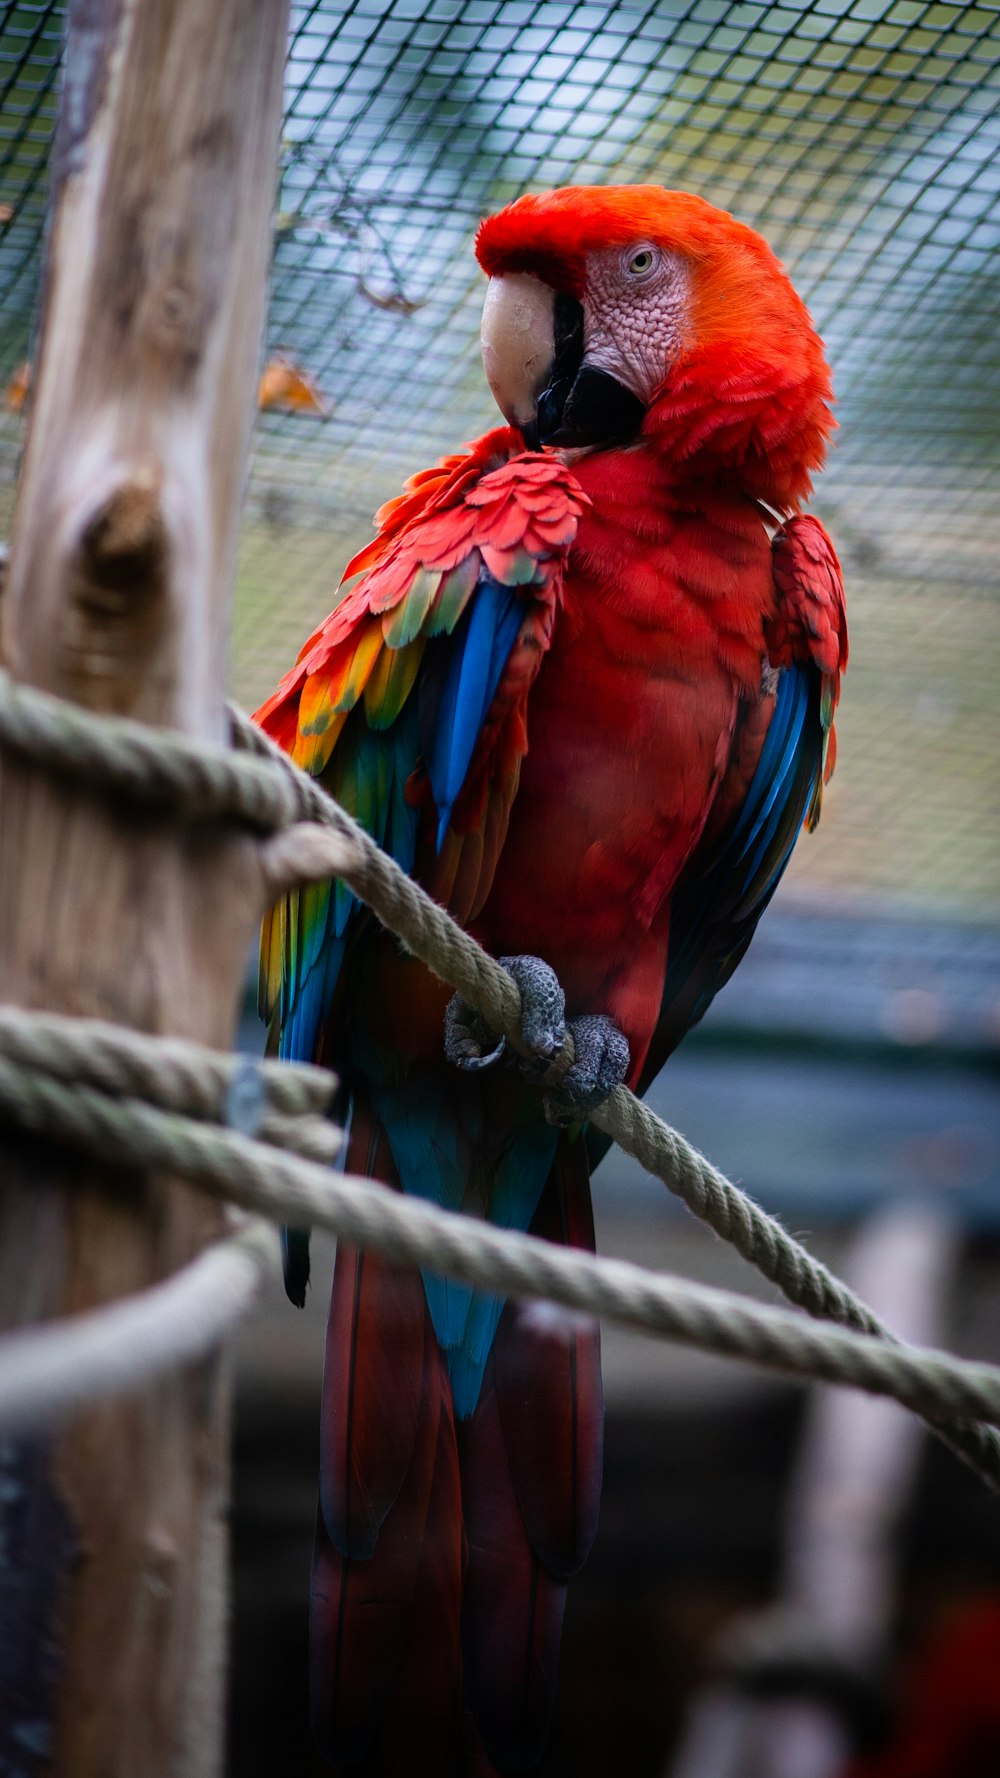 a colorful parrot perched on top of a wooden pole